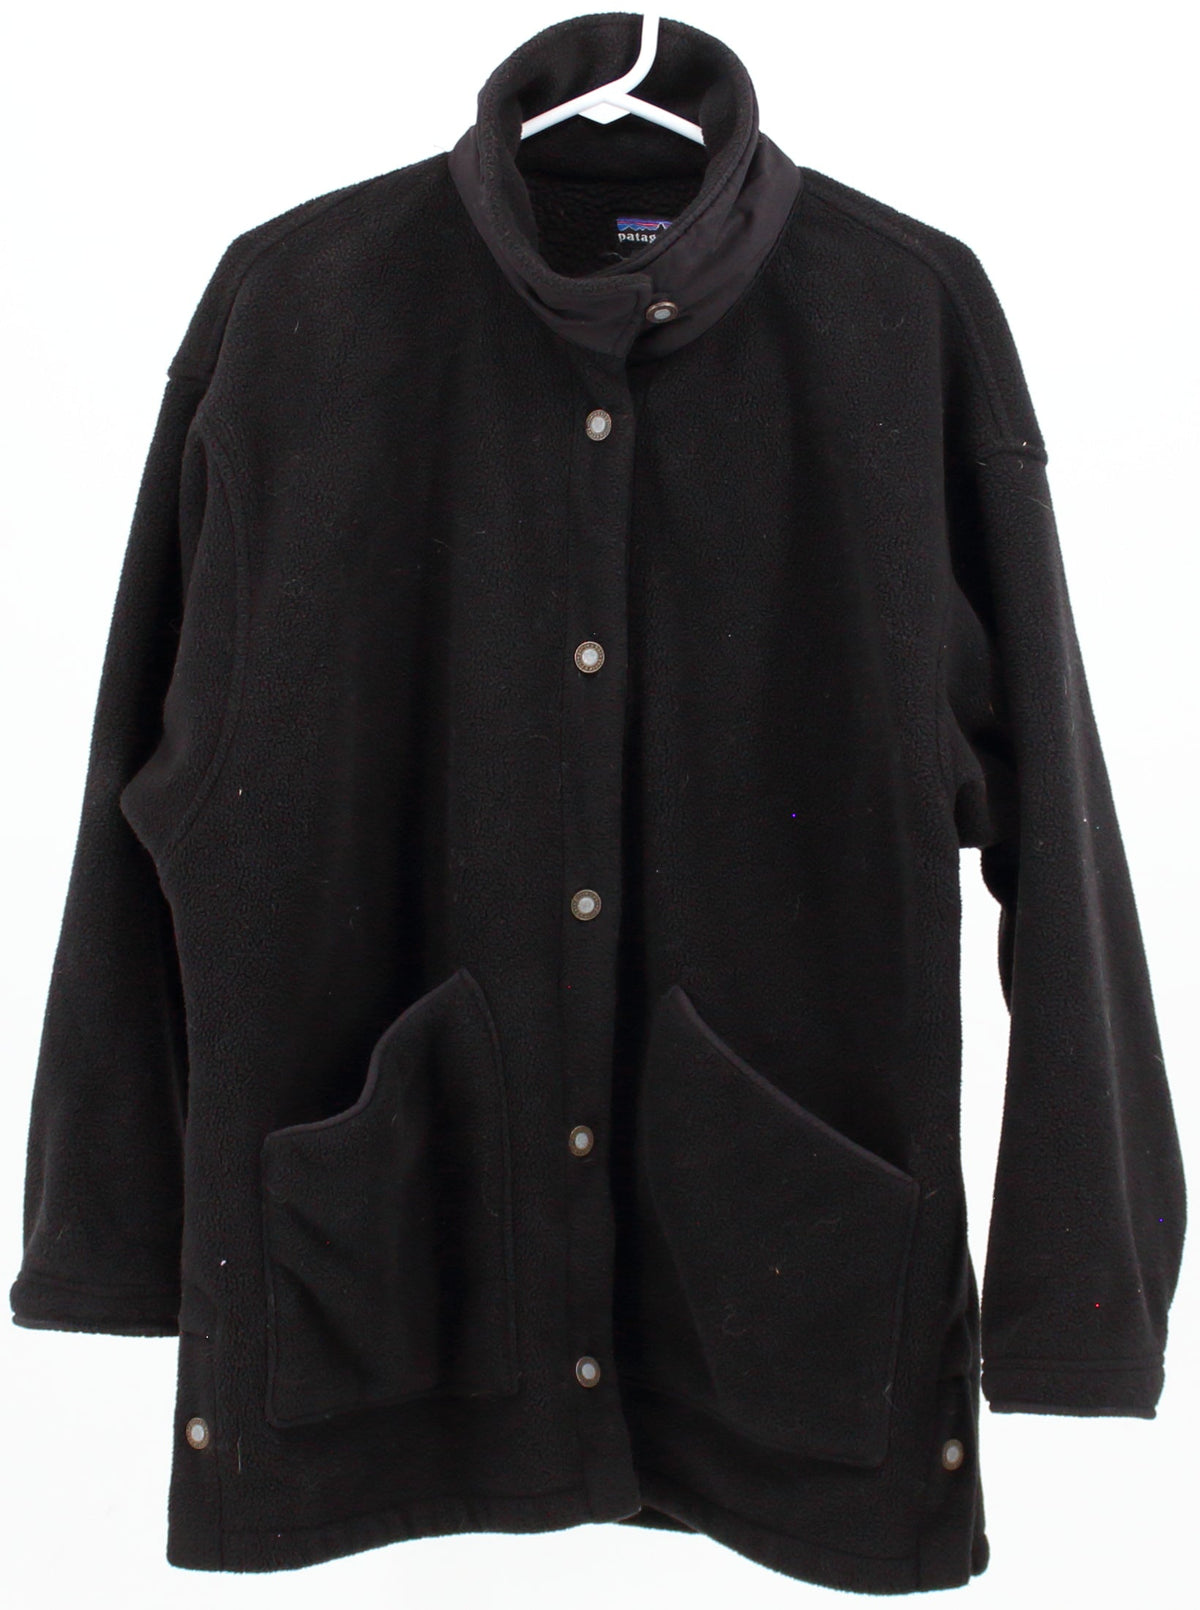 Patagonia Black Fleece Buttons Mid Jacket